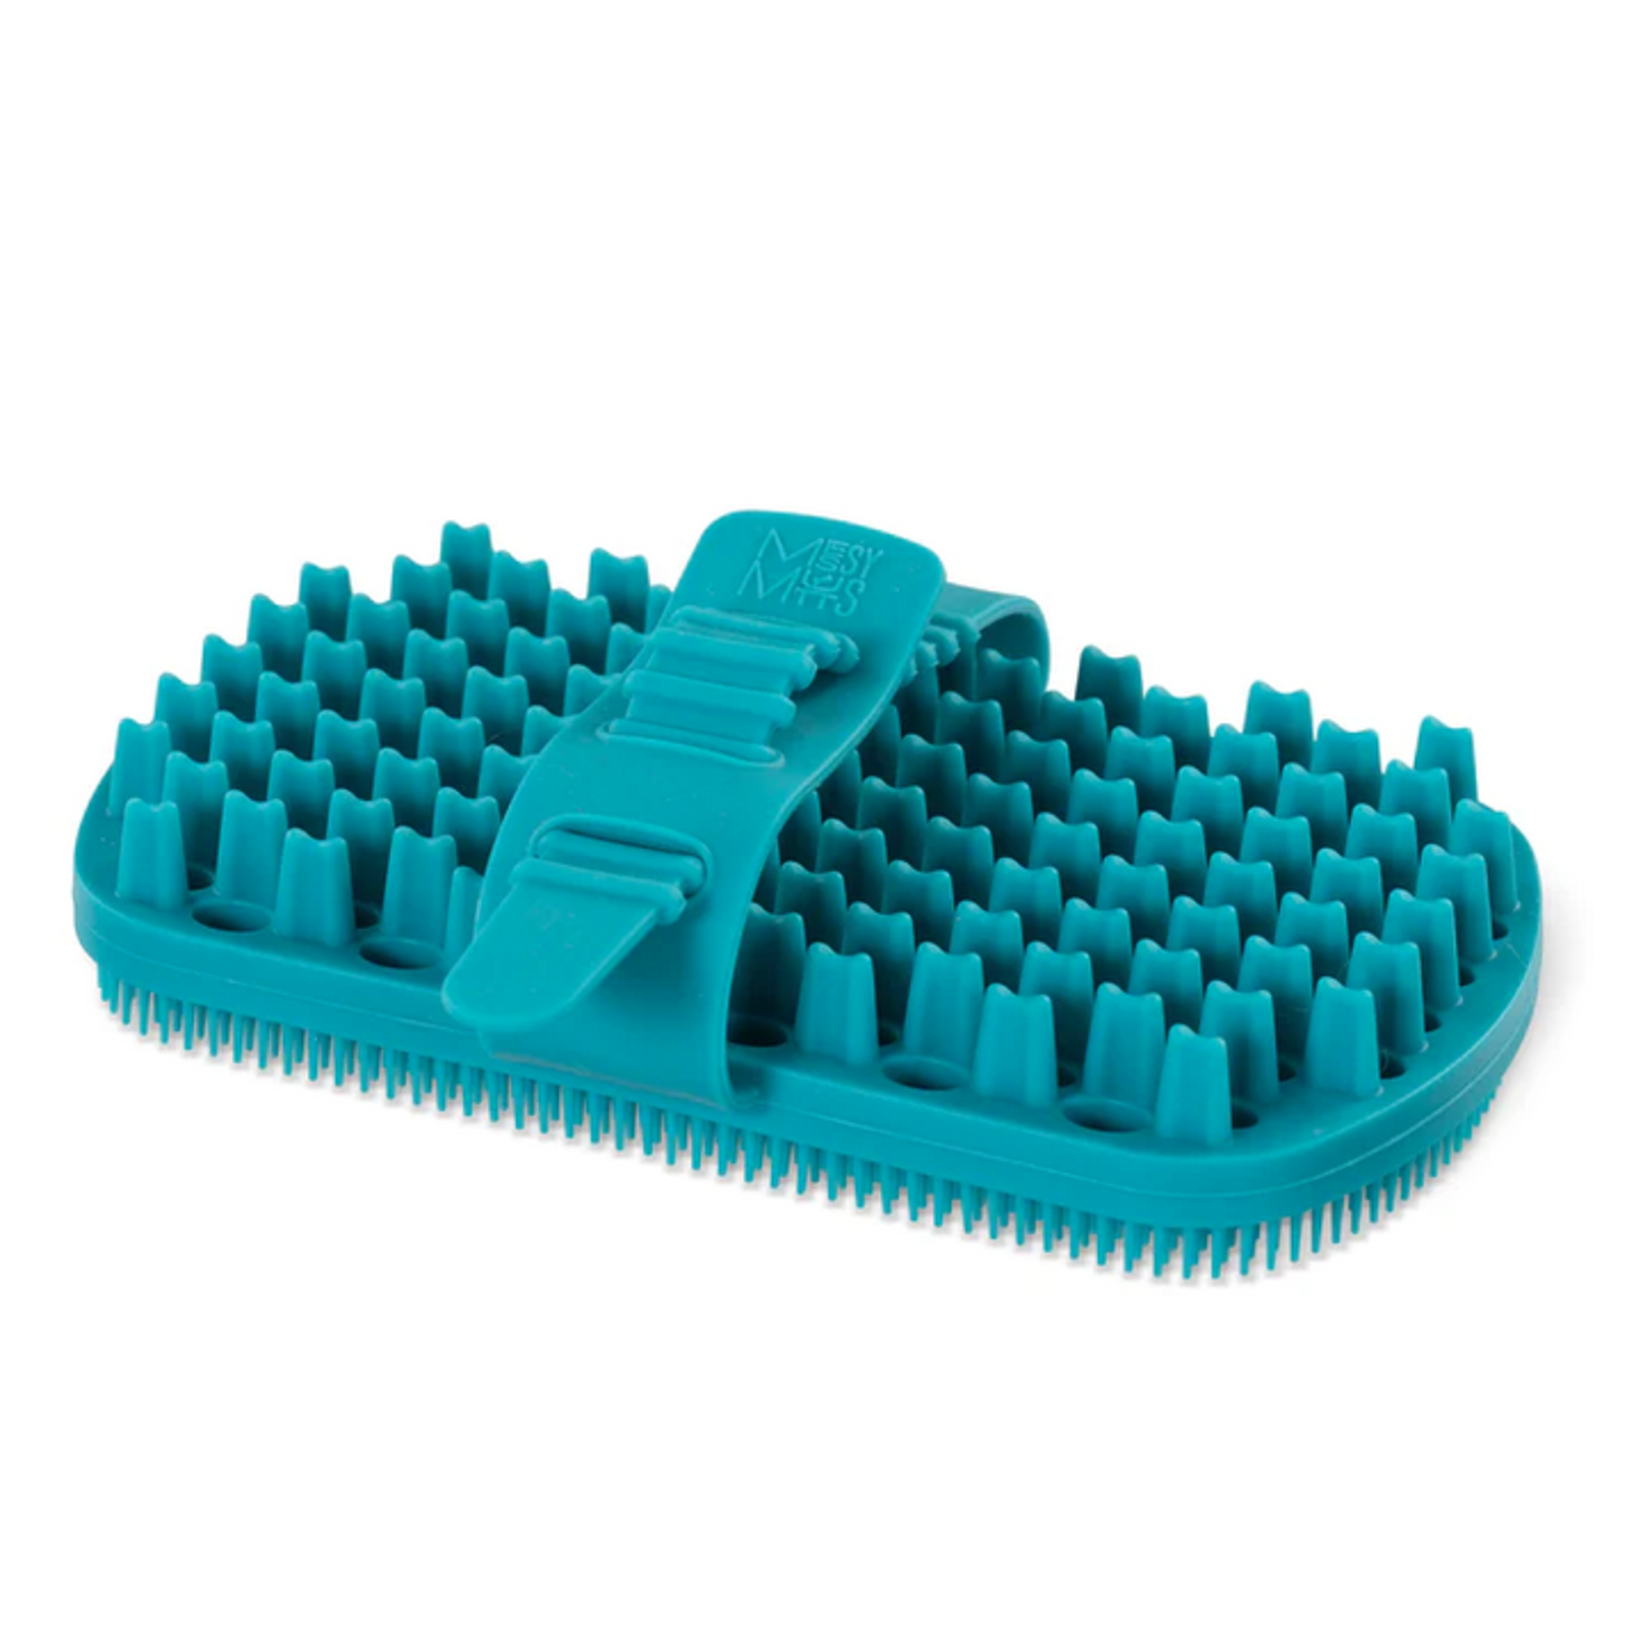 Messy Mutts Messy Mutts Dog Grooming Brush Dual Sided Blue